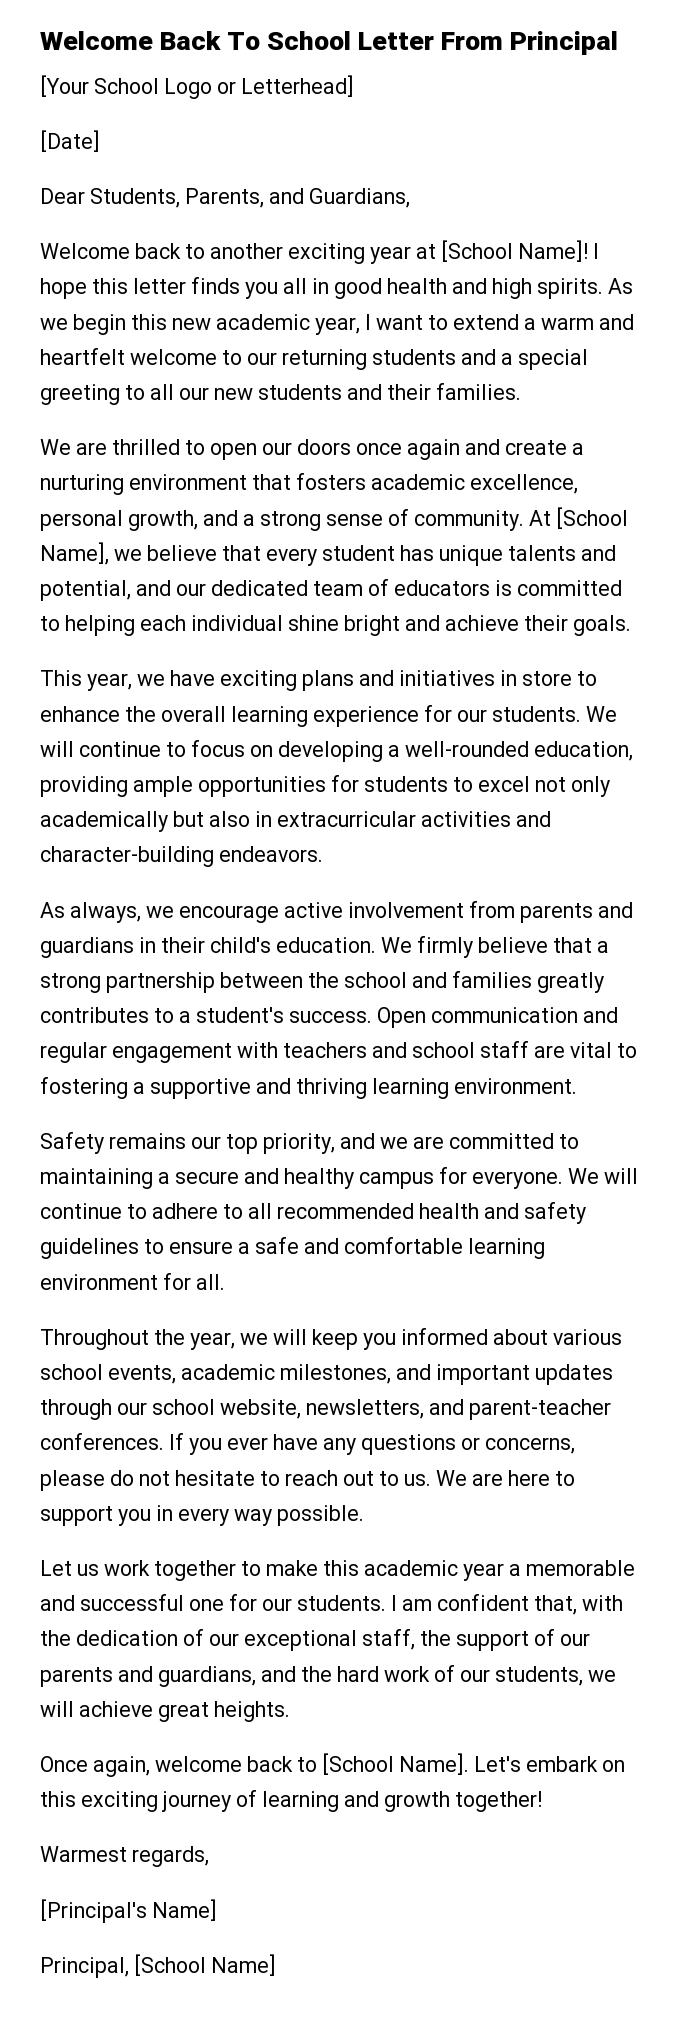 Welcome Back To School Letter From Principal